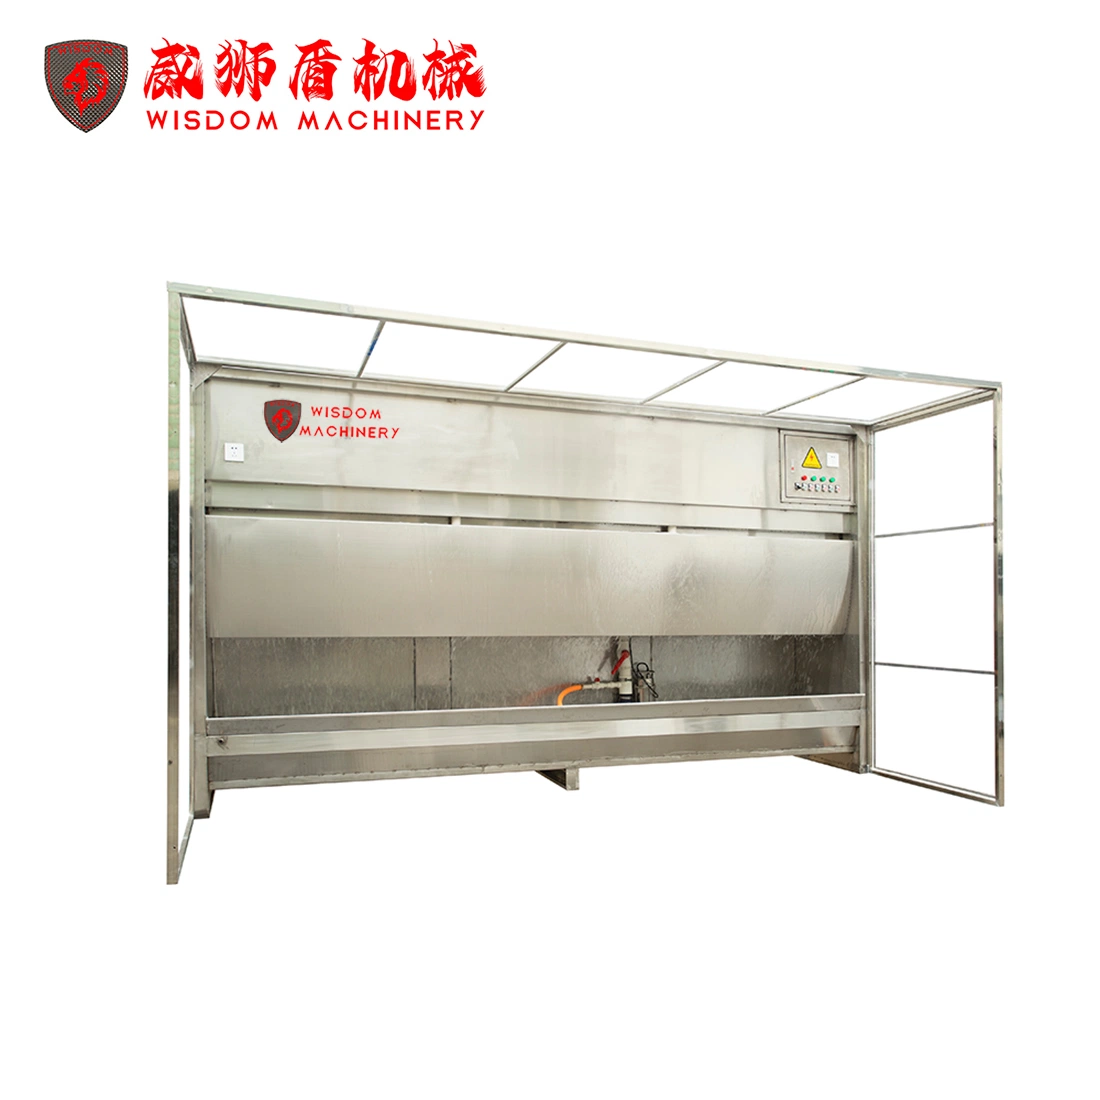 Waterfall Dust Collection Booth, Water Fall Dust Collector, Water Wall Dust Collection System Waterwall Dust Collector for Stone Firberglass Porcelain Dust